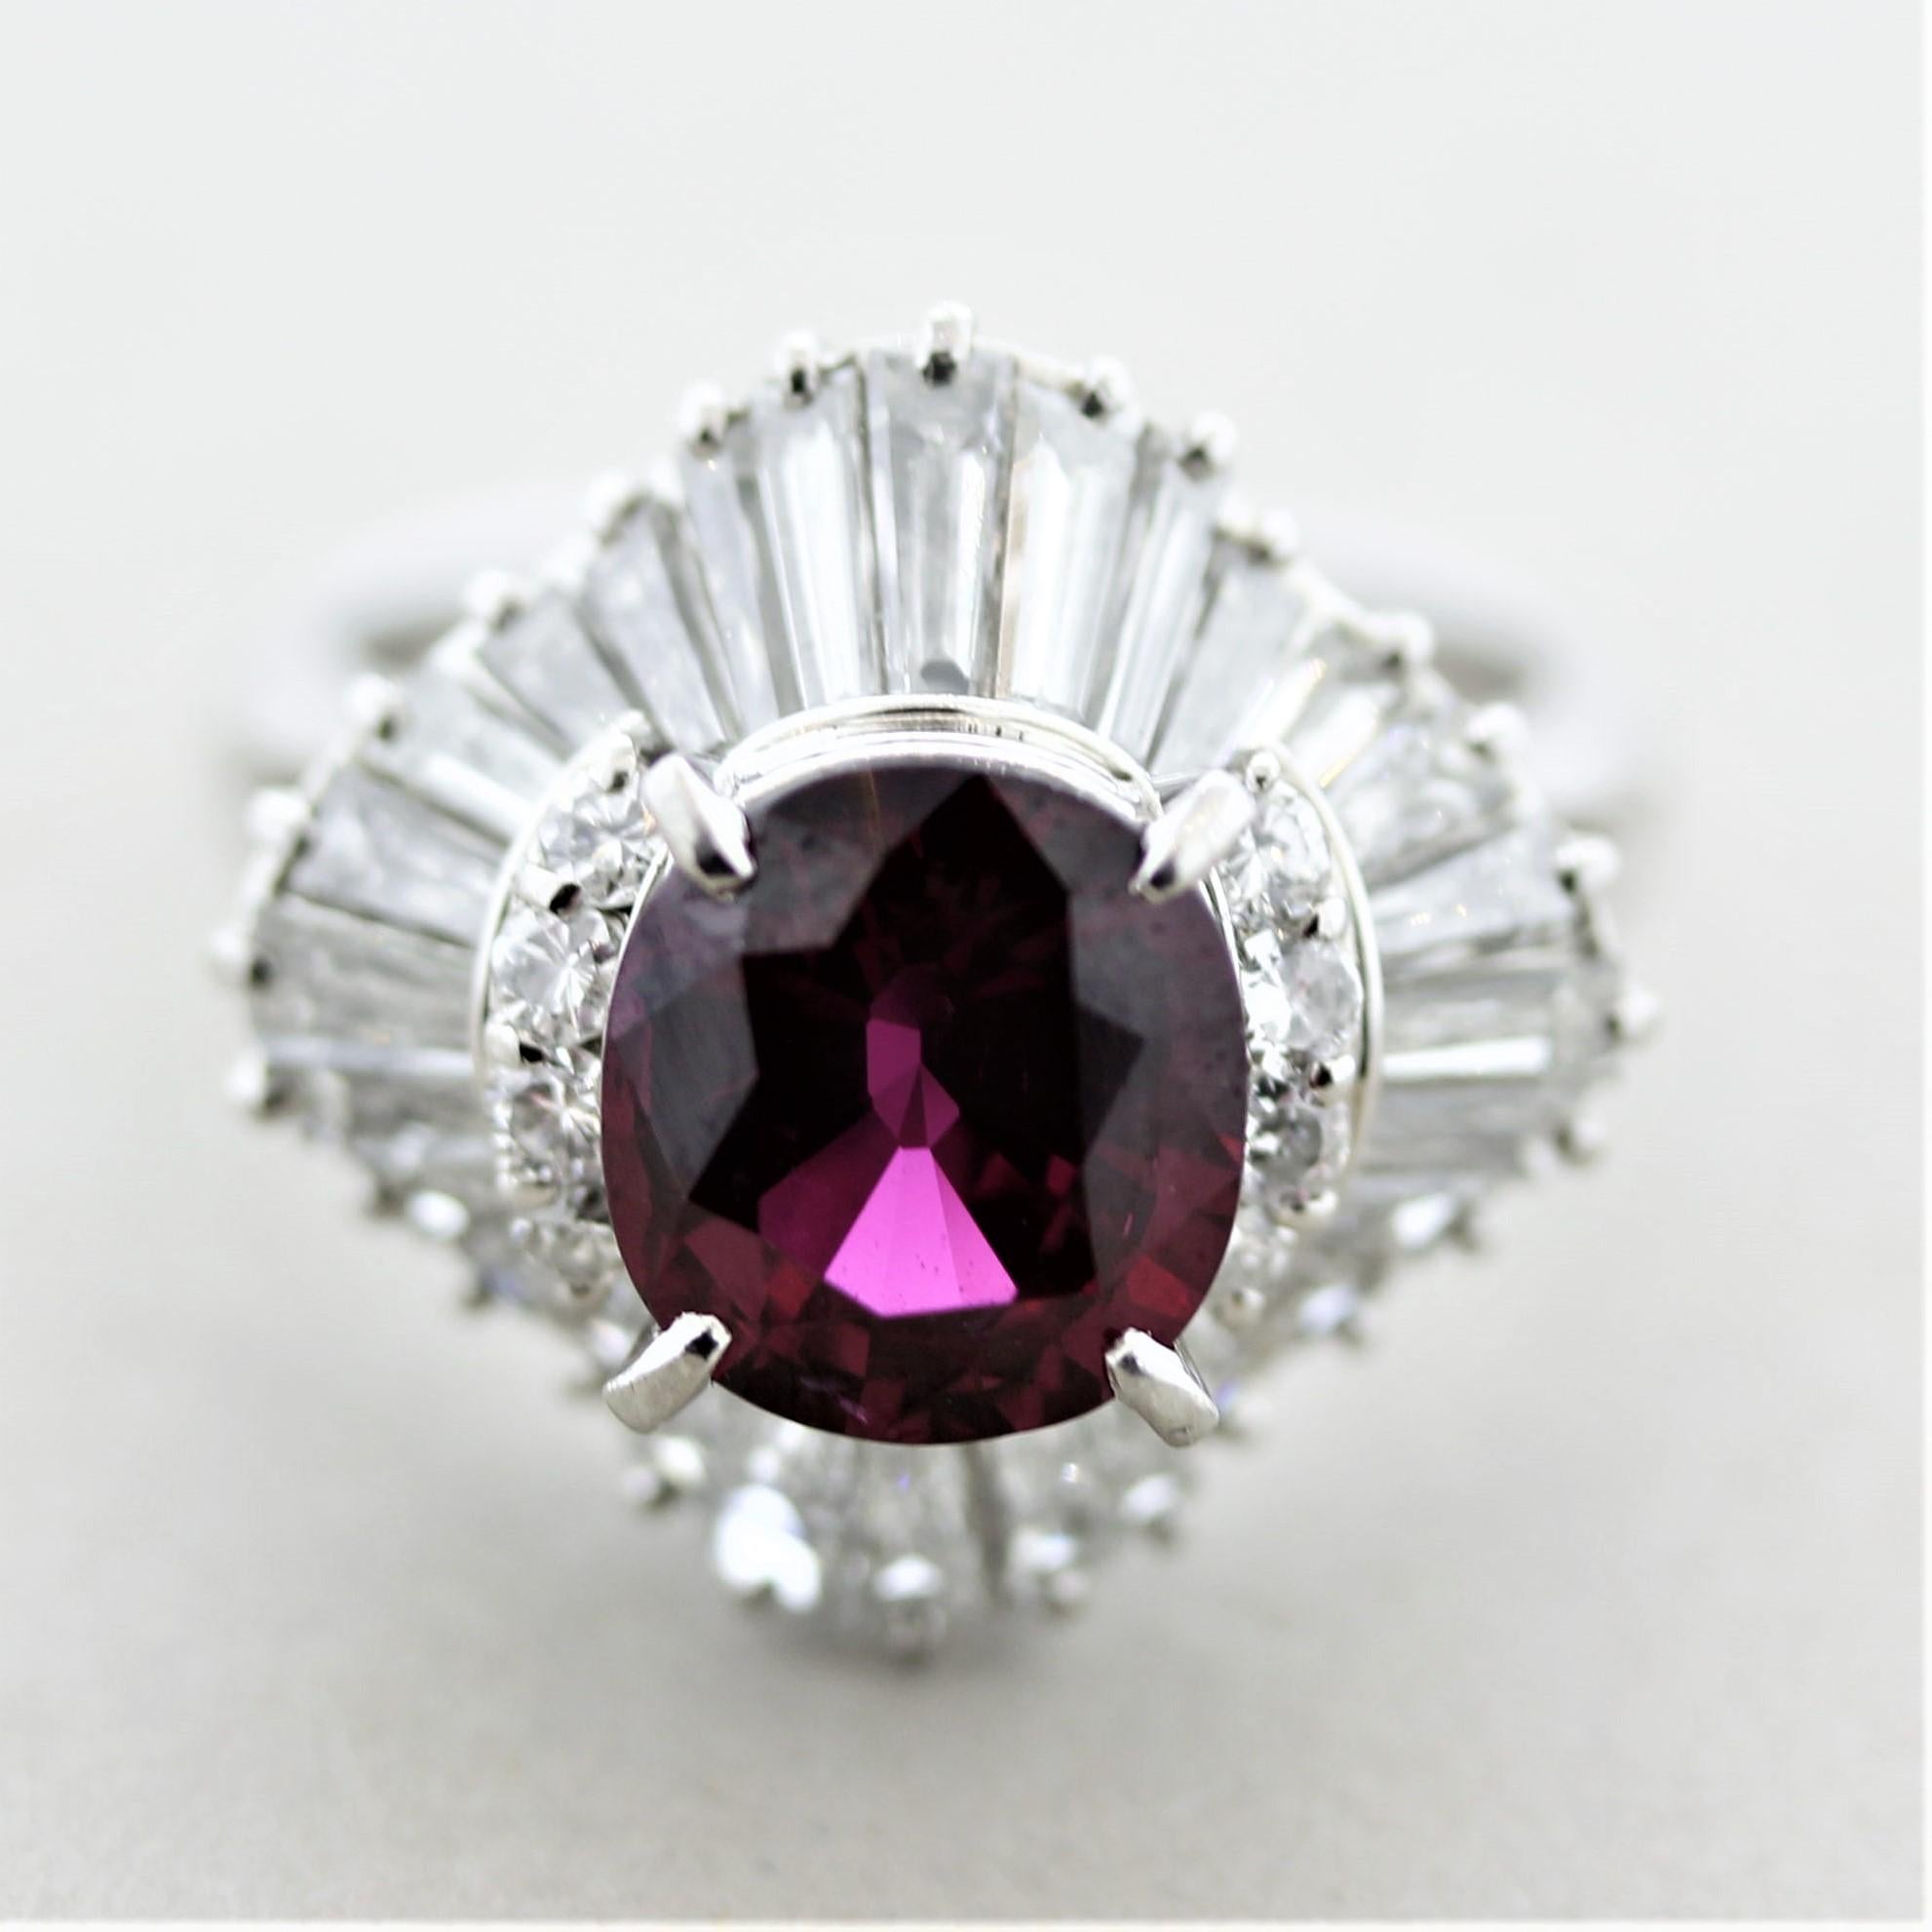 A superb gem weighing a substantial 3.20 carat, this ruby has the ideal color, clarity, brilliance and is completely natural with no treatments certified by the GIA. It has a rich and bright slightly purplish red color that is typical of Thai